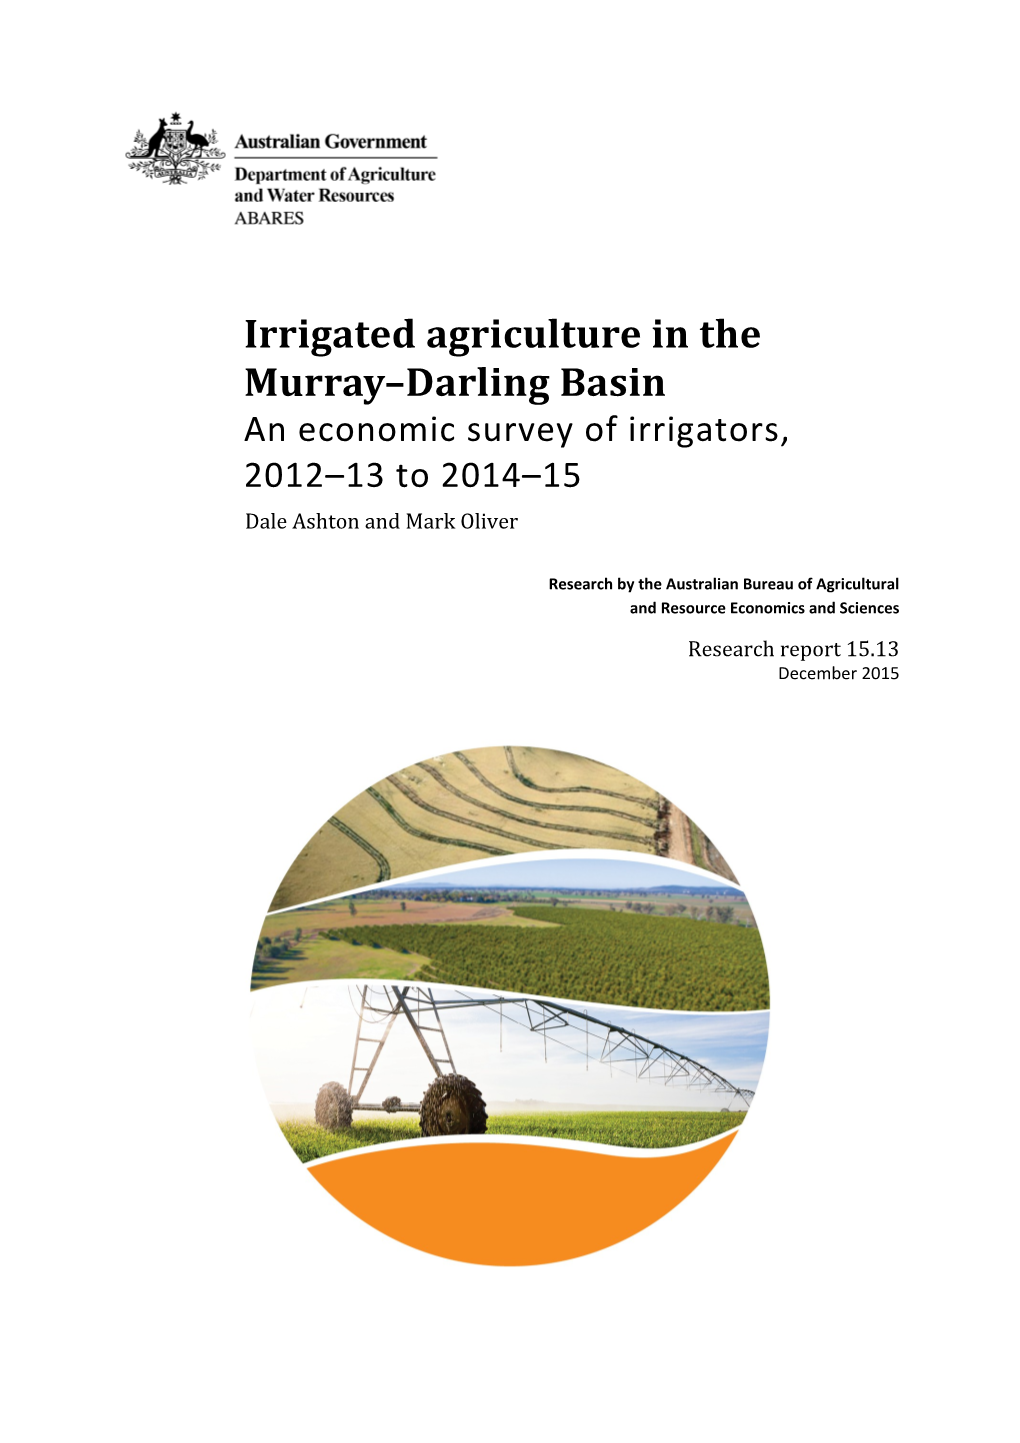 Irrigated Agriculture in the Murray Darling Basin